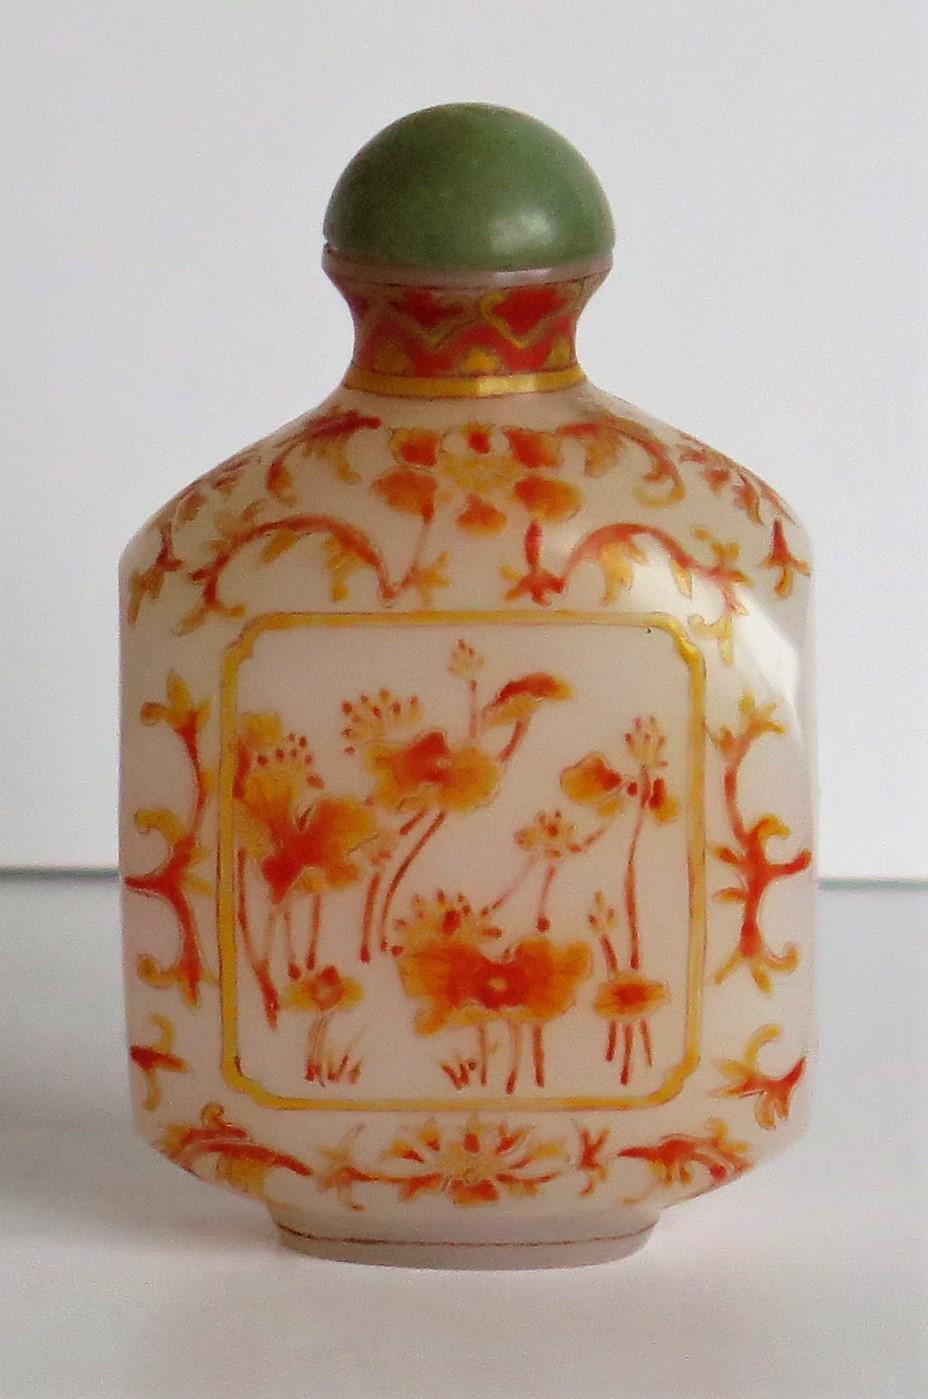 19th Century Chinese Opaque Glass Snuff Bottle Hand Enamelled 4-Character Base Mark